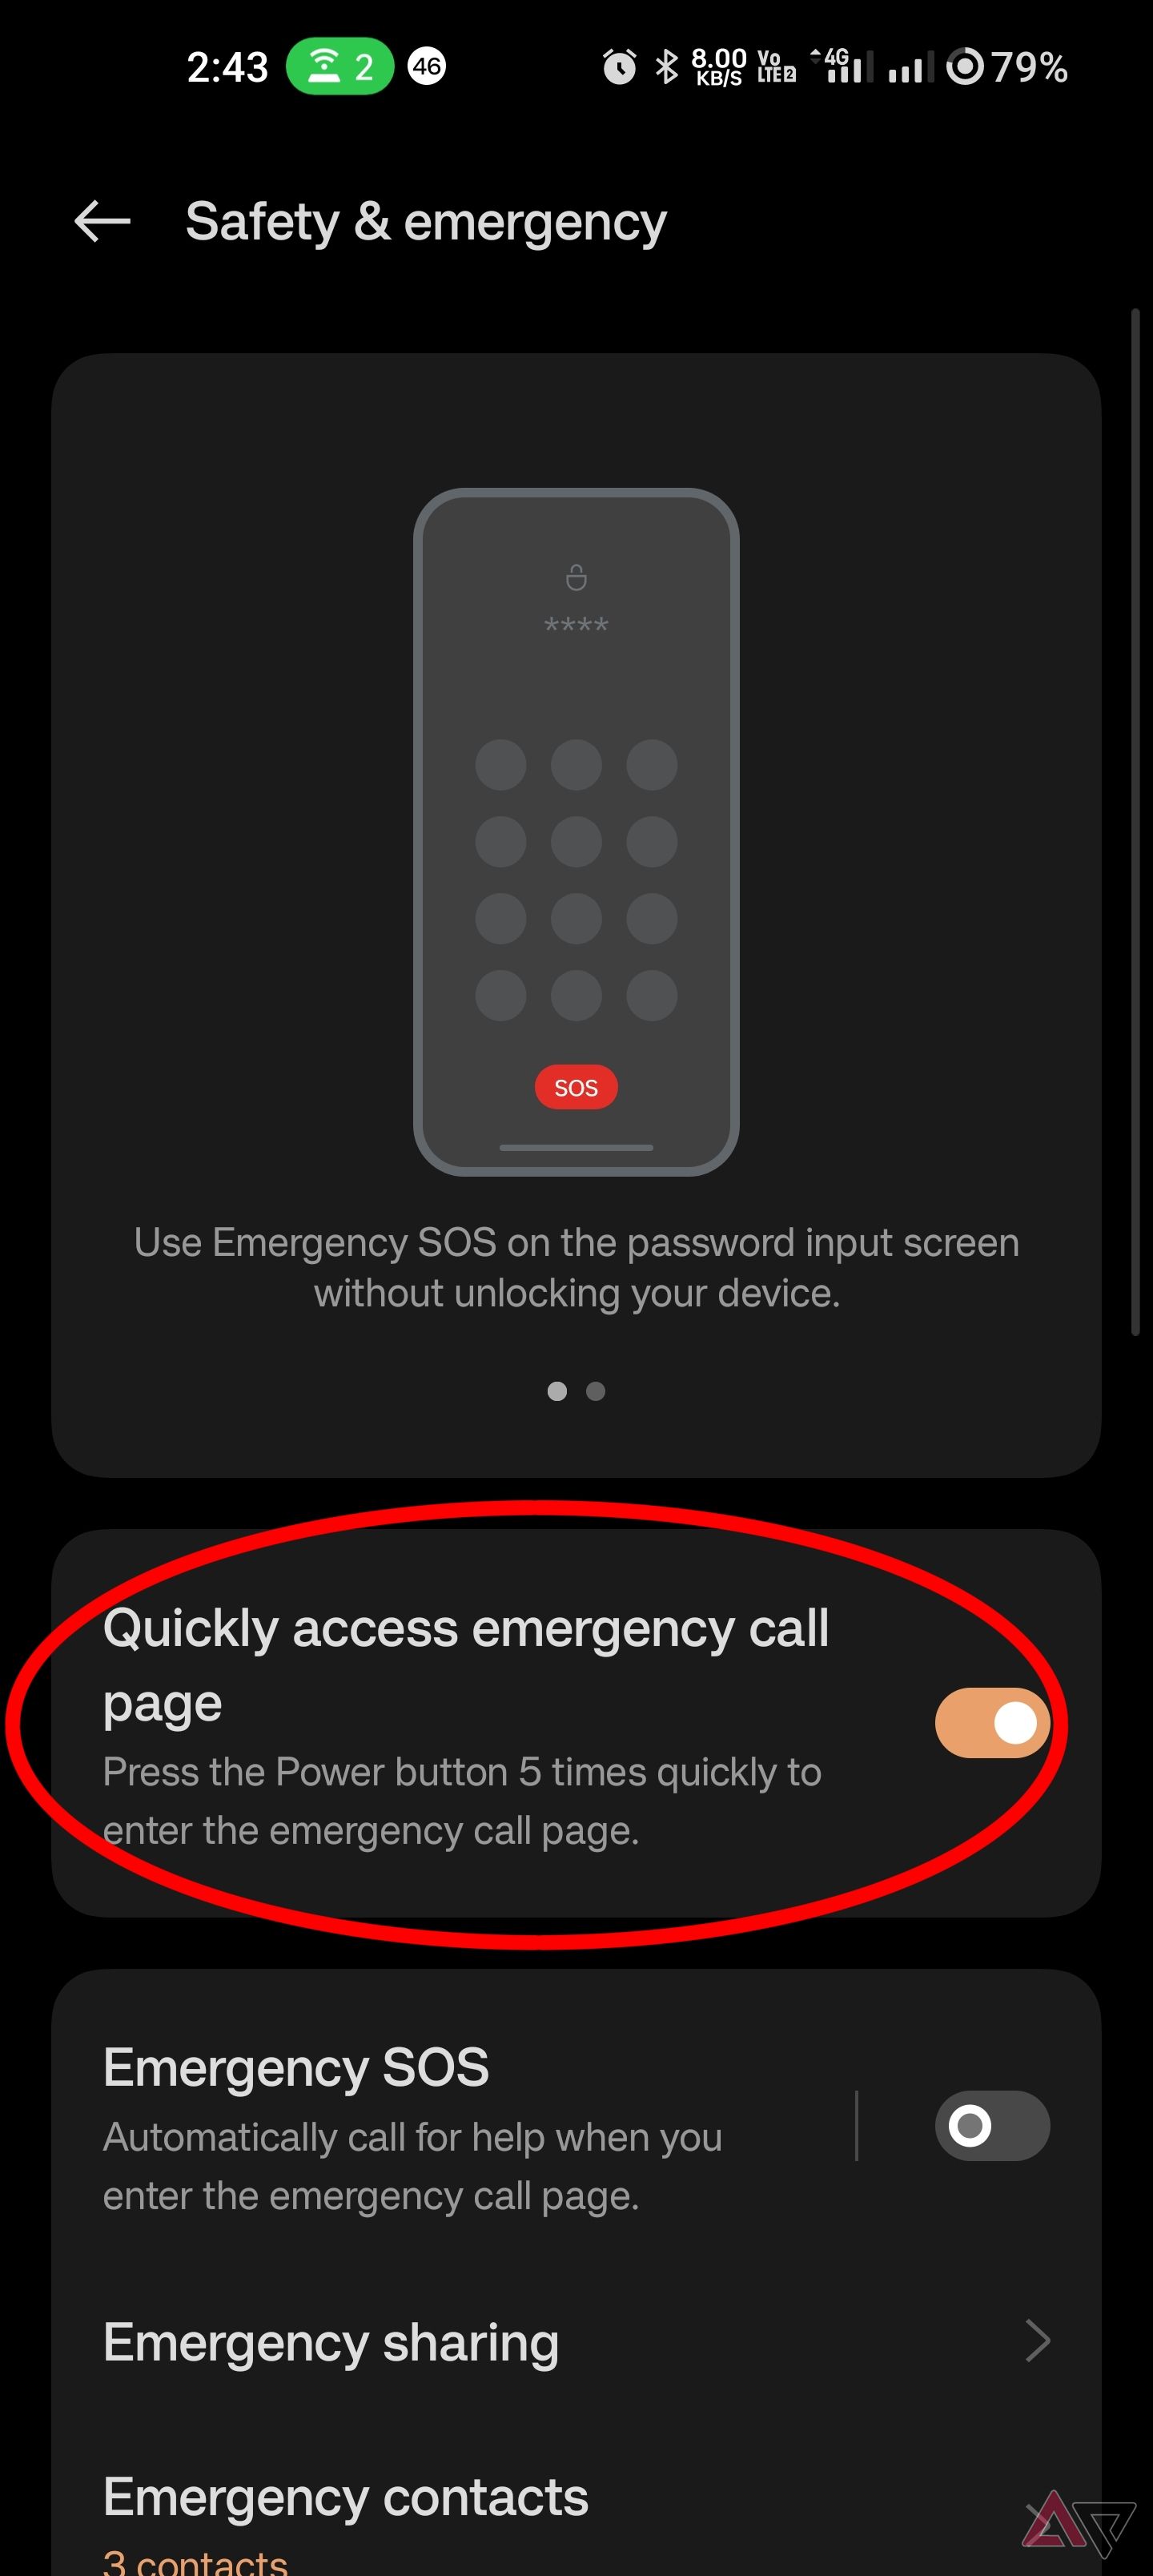 Toggle the option to quickly access your emergency call page via the power button.